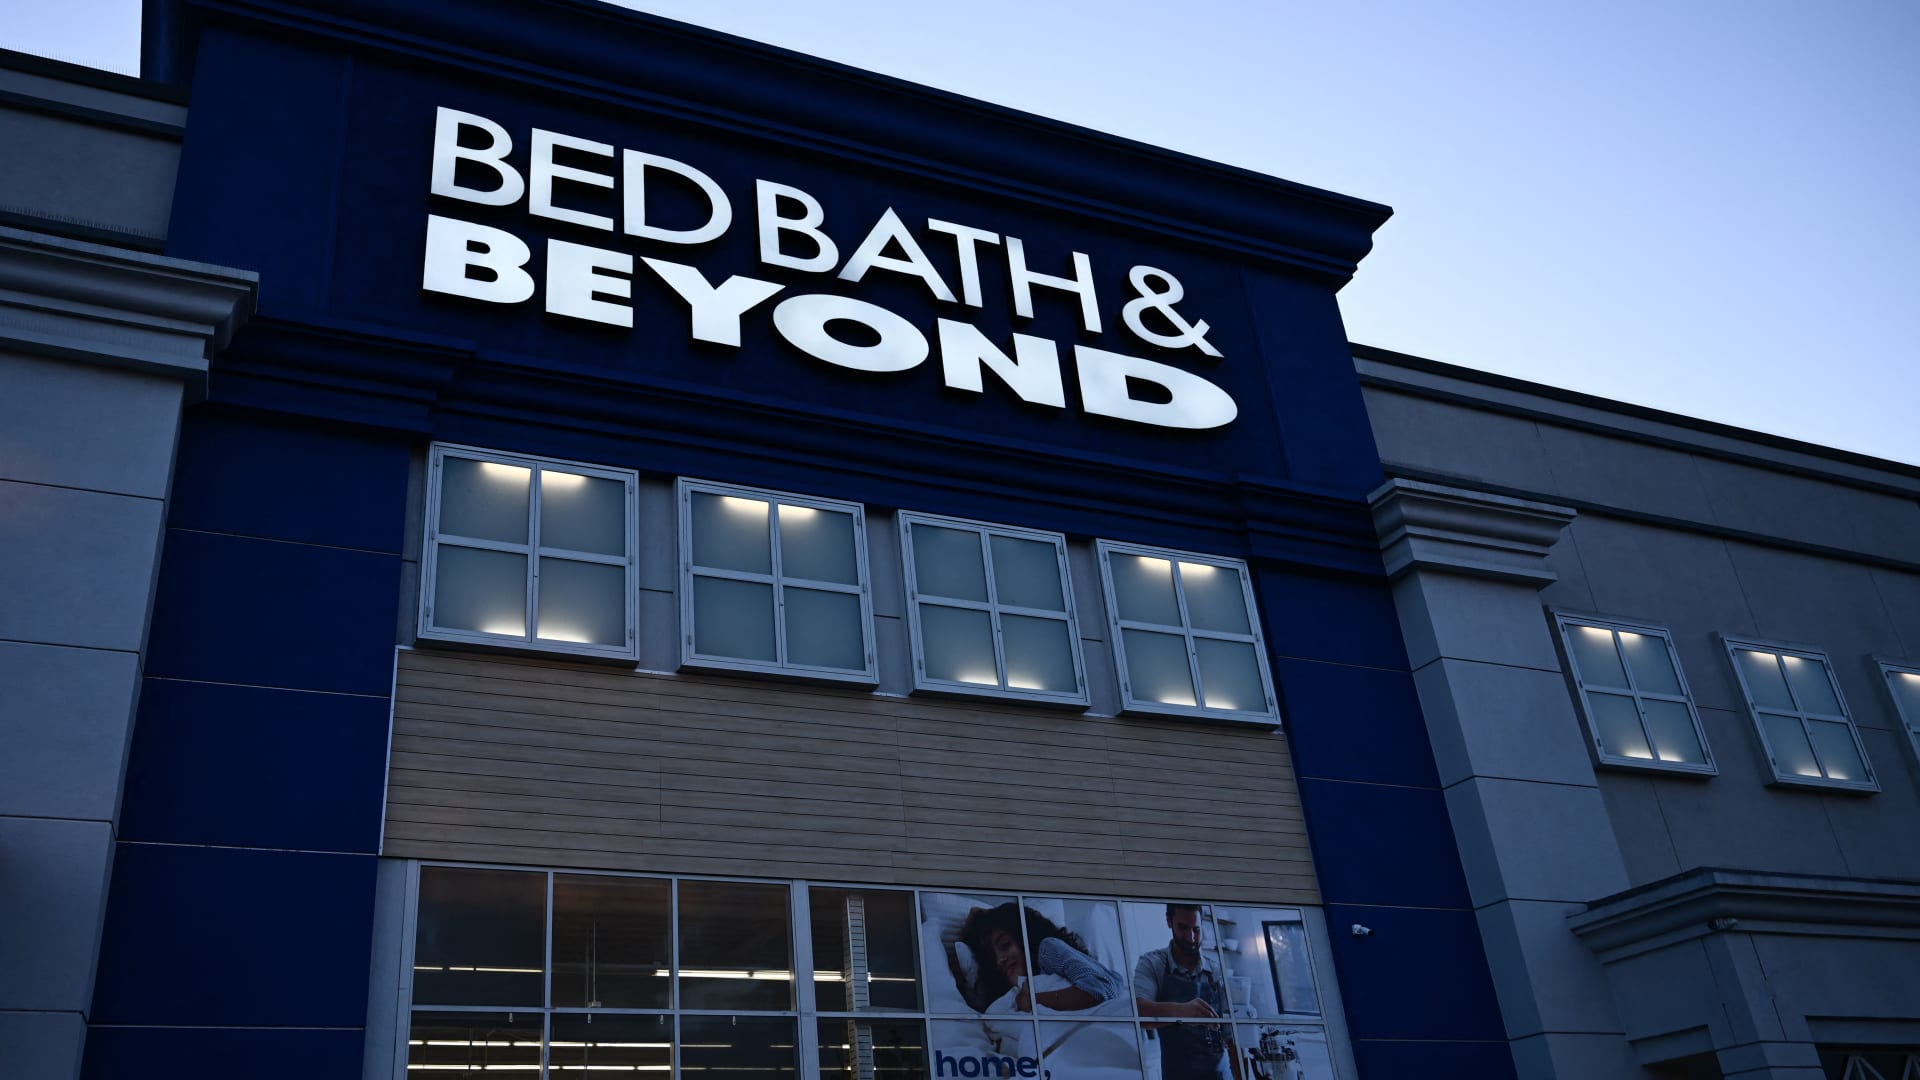 Investor JAT Capital sends scathing letter to novel Mattress Bath & Beyond board over CEO ouster, vacancy